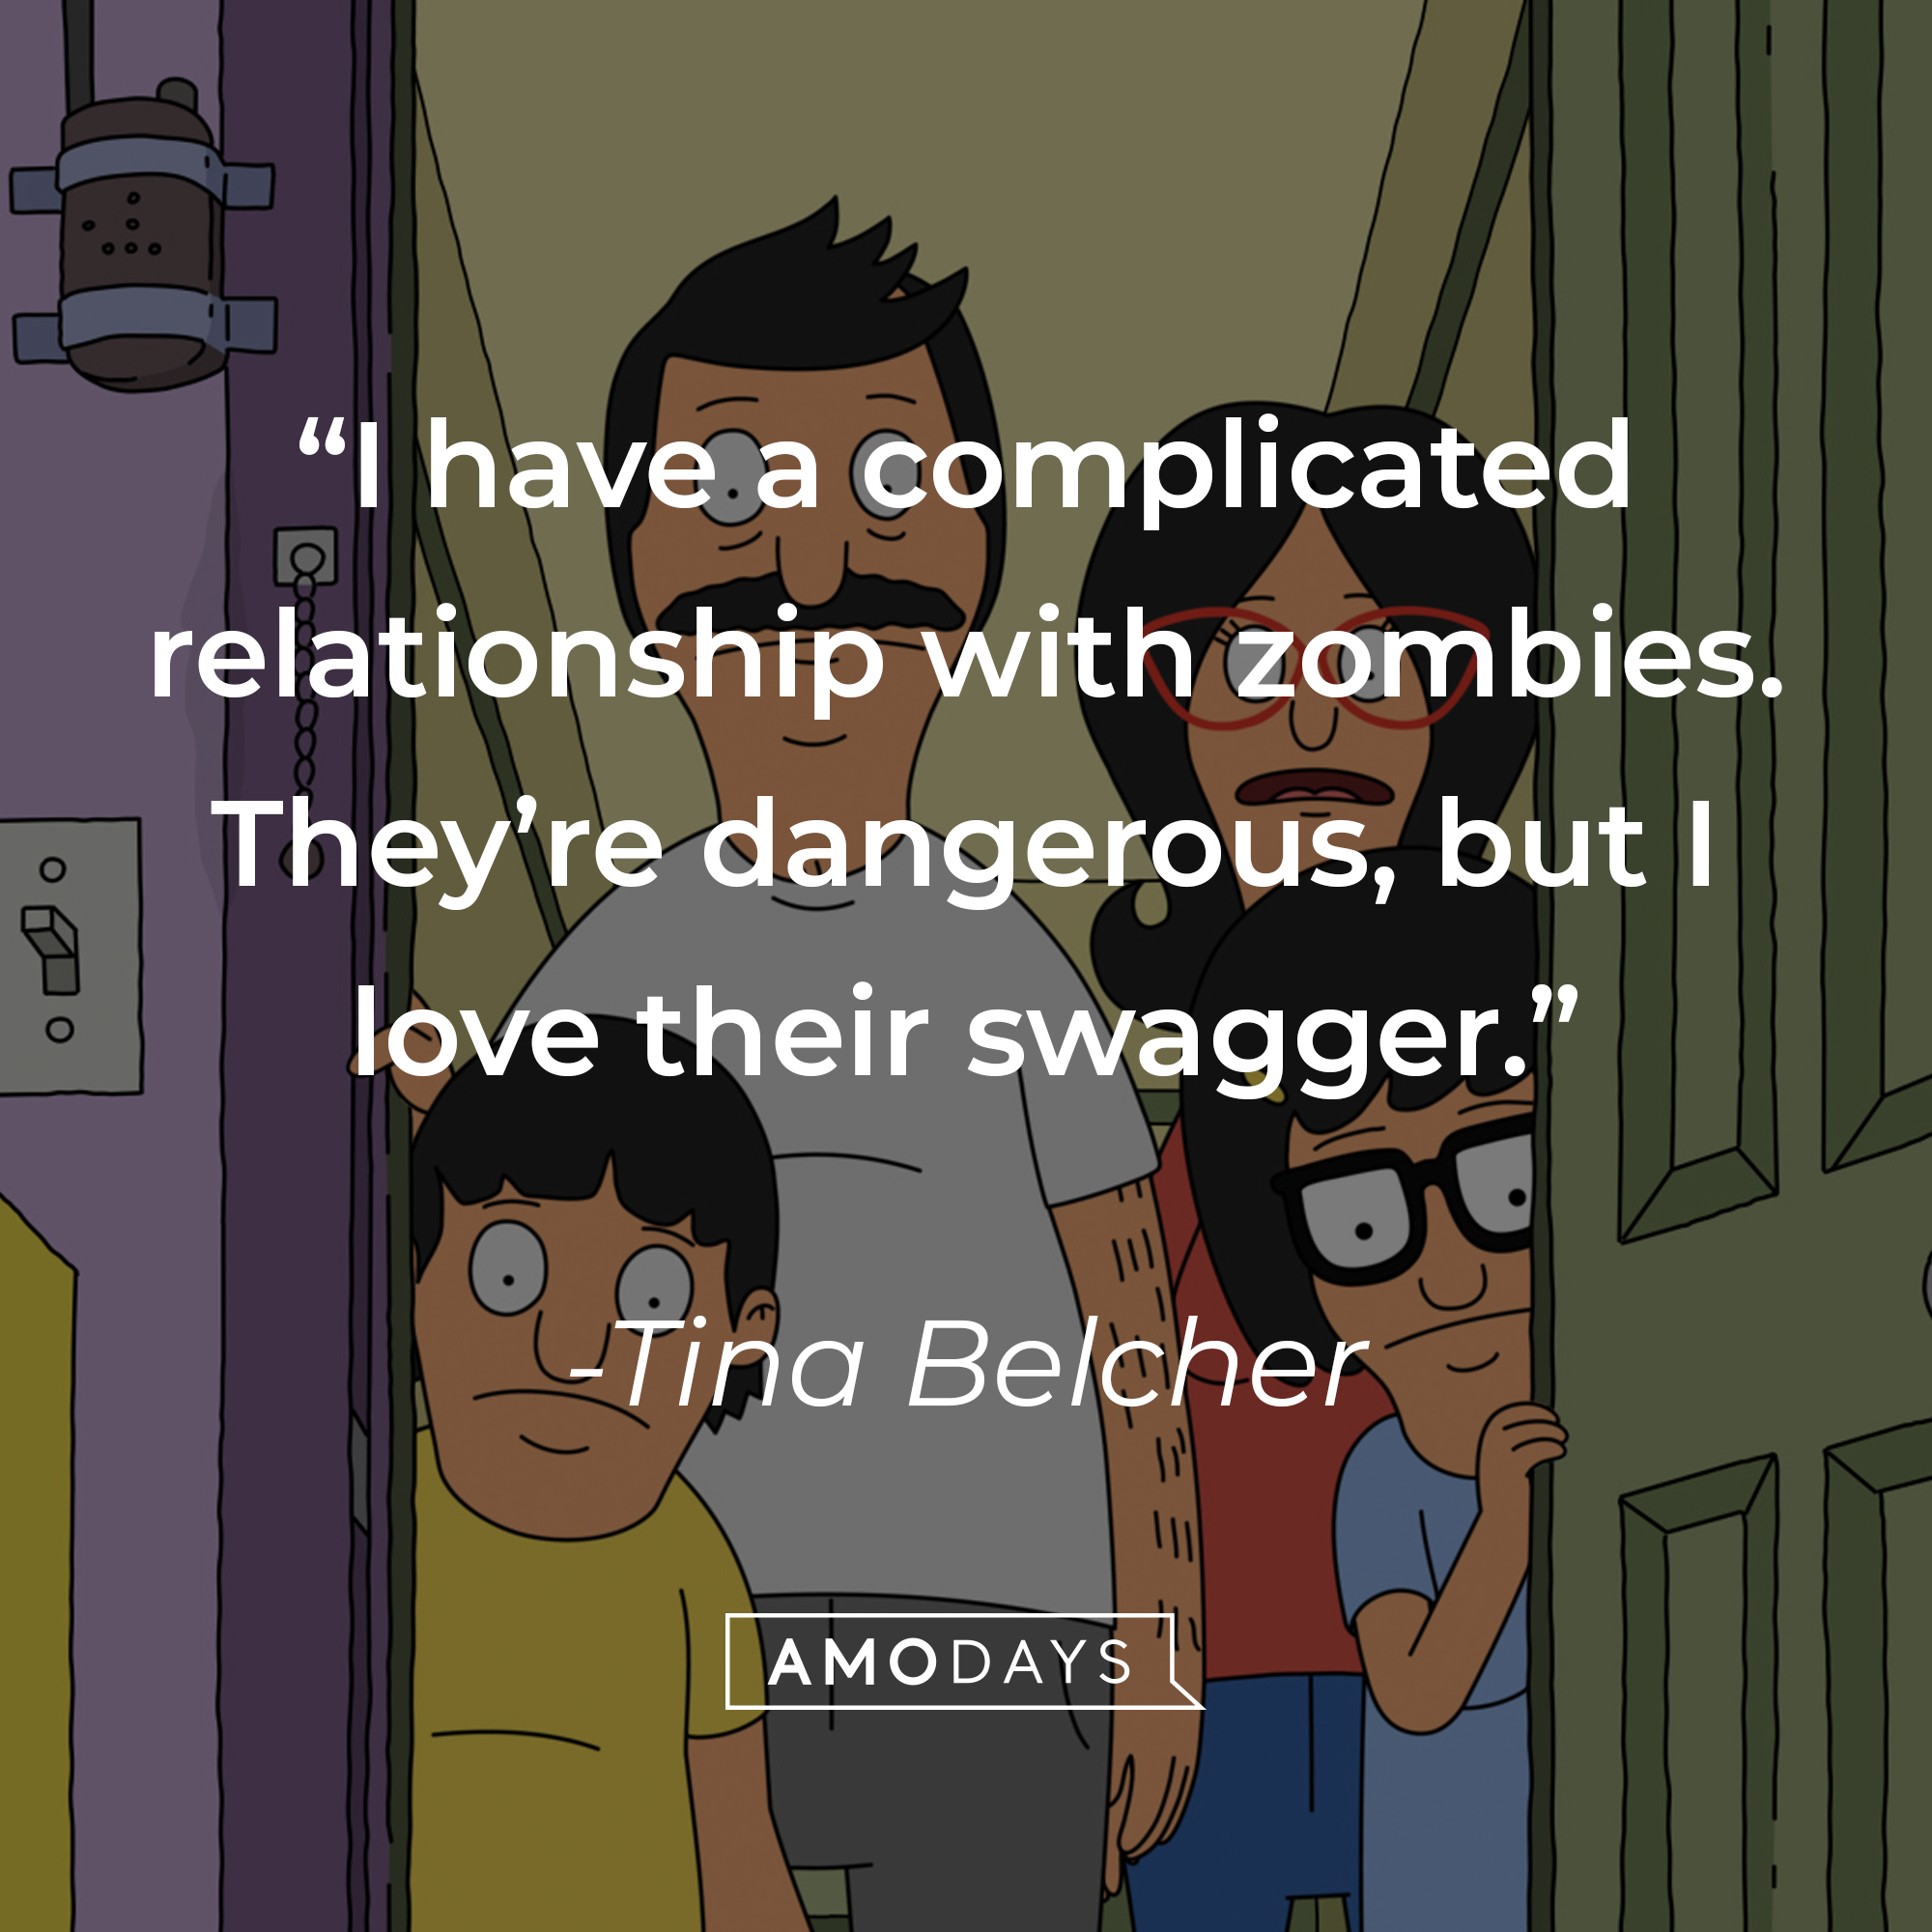 An Image of Tina Belcher and other characters from “Bob’s Burgers” with her quote: “I have a complicated relationship with zombies. They’re dangerous, but I love their swagger.” | Source: Facebook.com/BobsBurgers